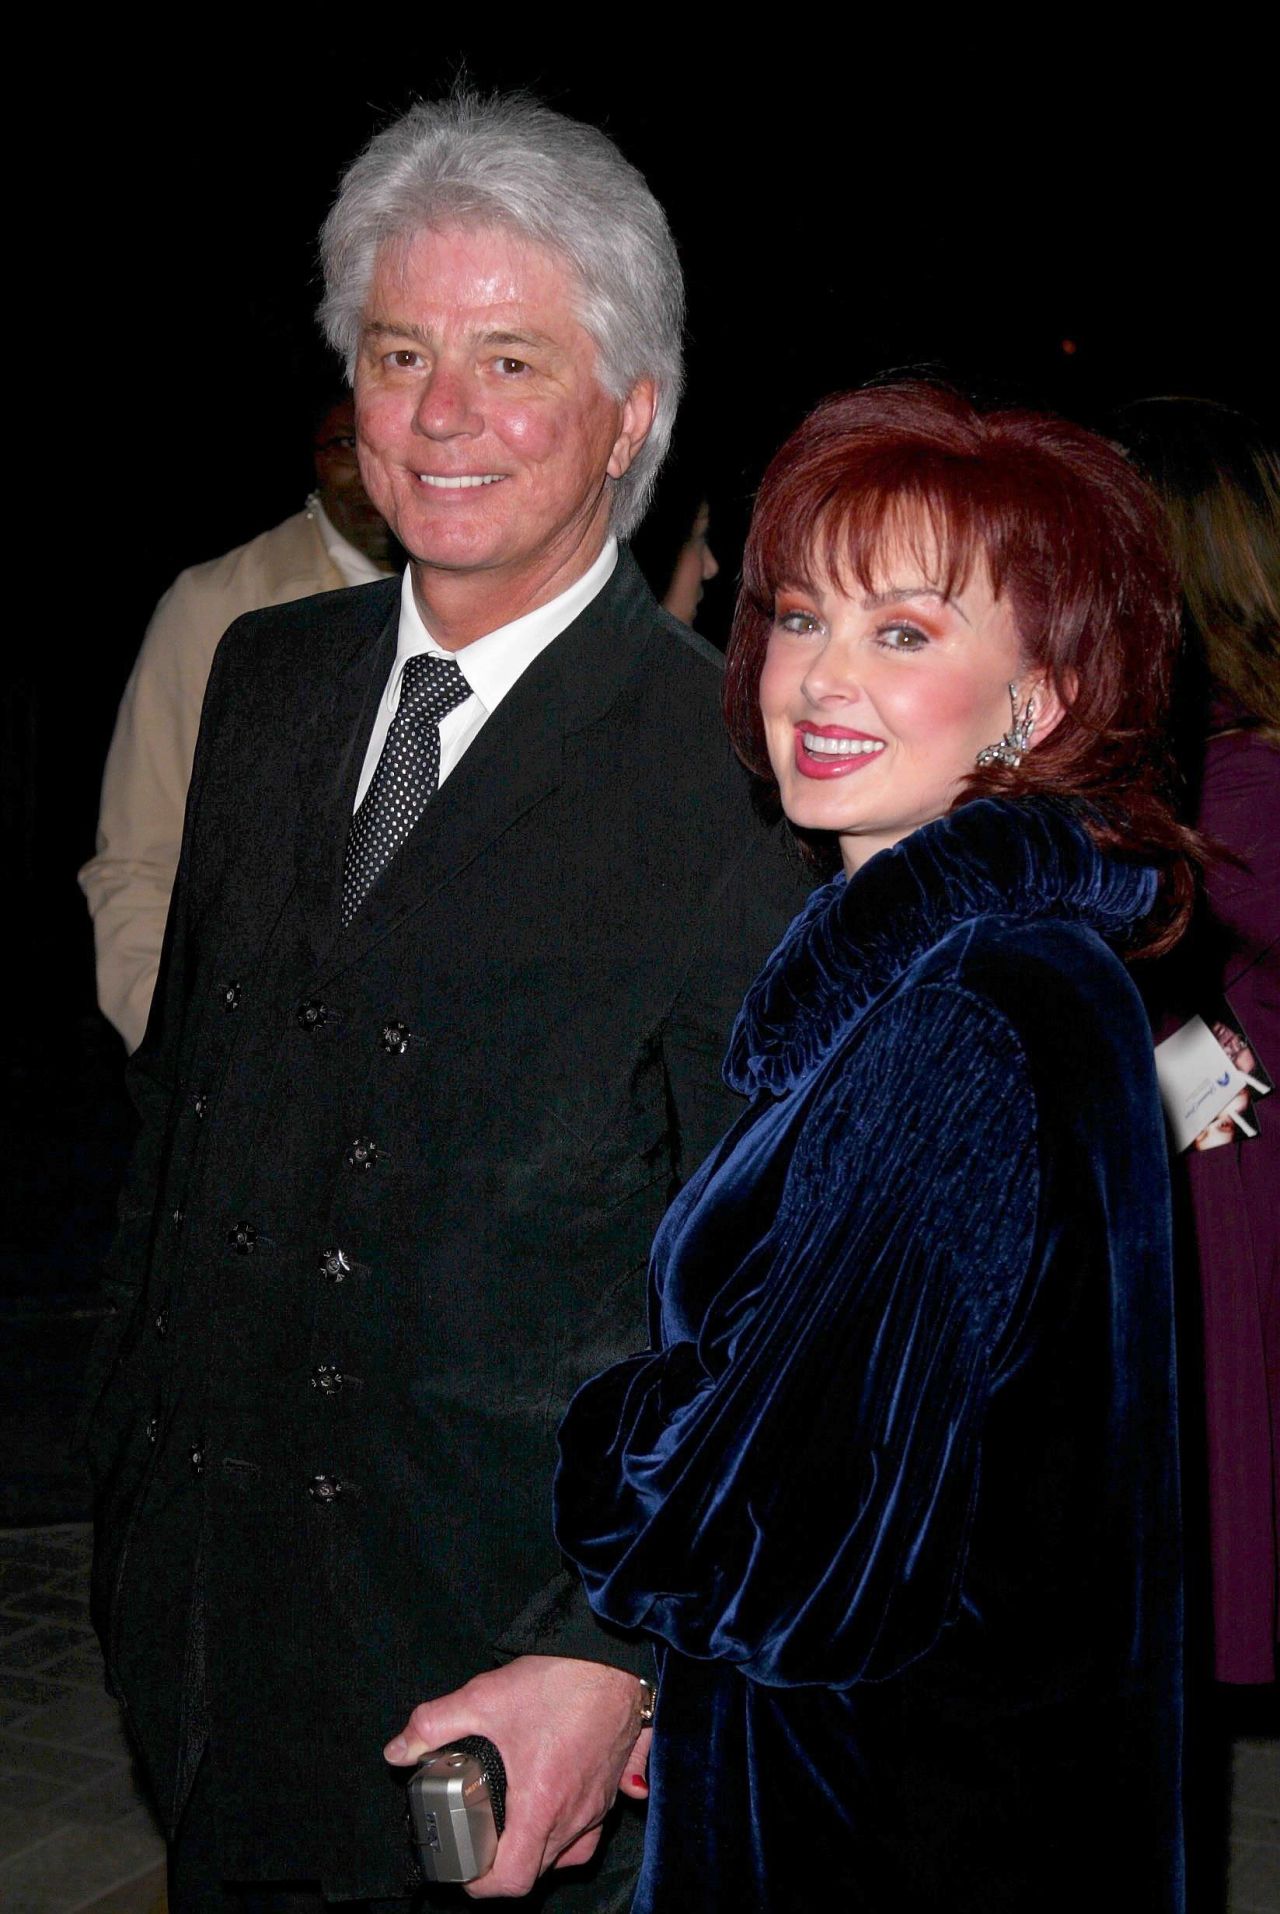 Judd and husband Larry Strickland at the "Twisted" film premiere in Los Angeles on February 23, 2004.